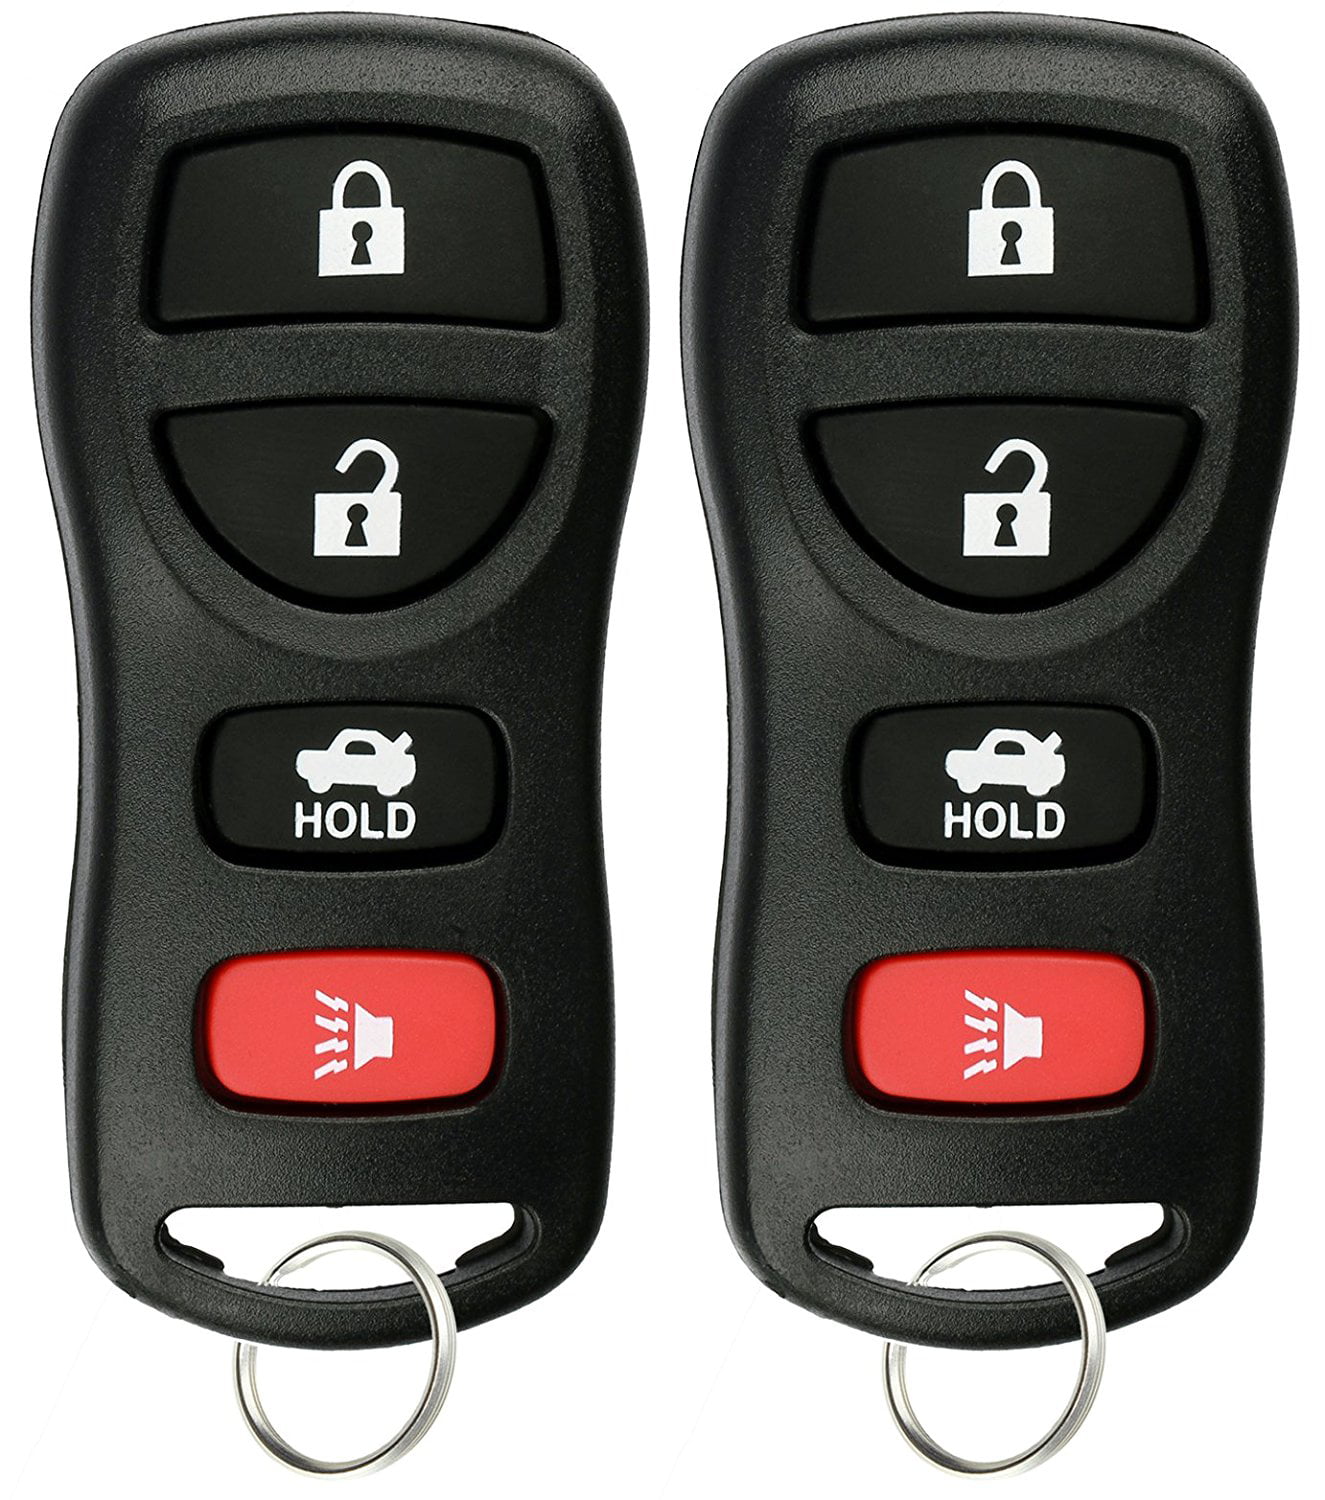 KOBGT04AA cciyu 2PCS 4 Buttons Keyless Entry Remote Fob Replacement fit for Buick/Chevy/ Saturn/Pontiac 991139-5210-1356507432